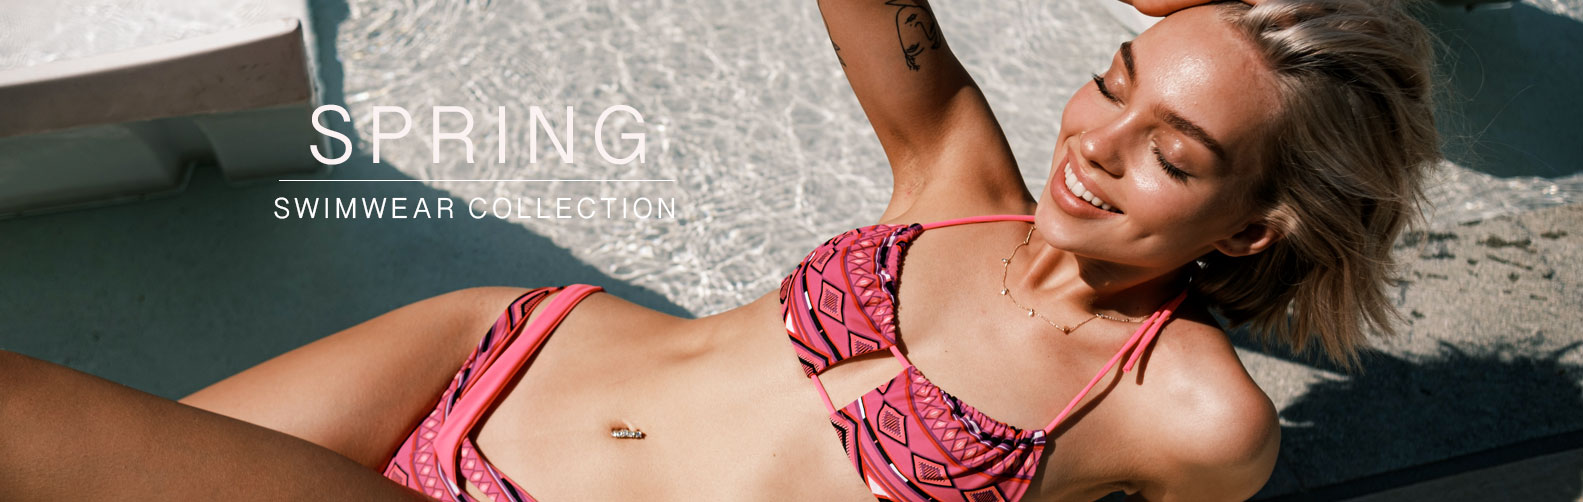 Spring Swimwear Collection